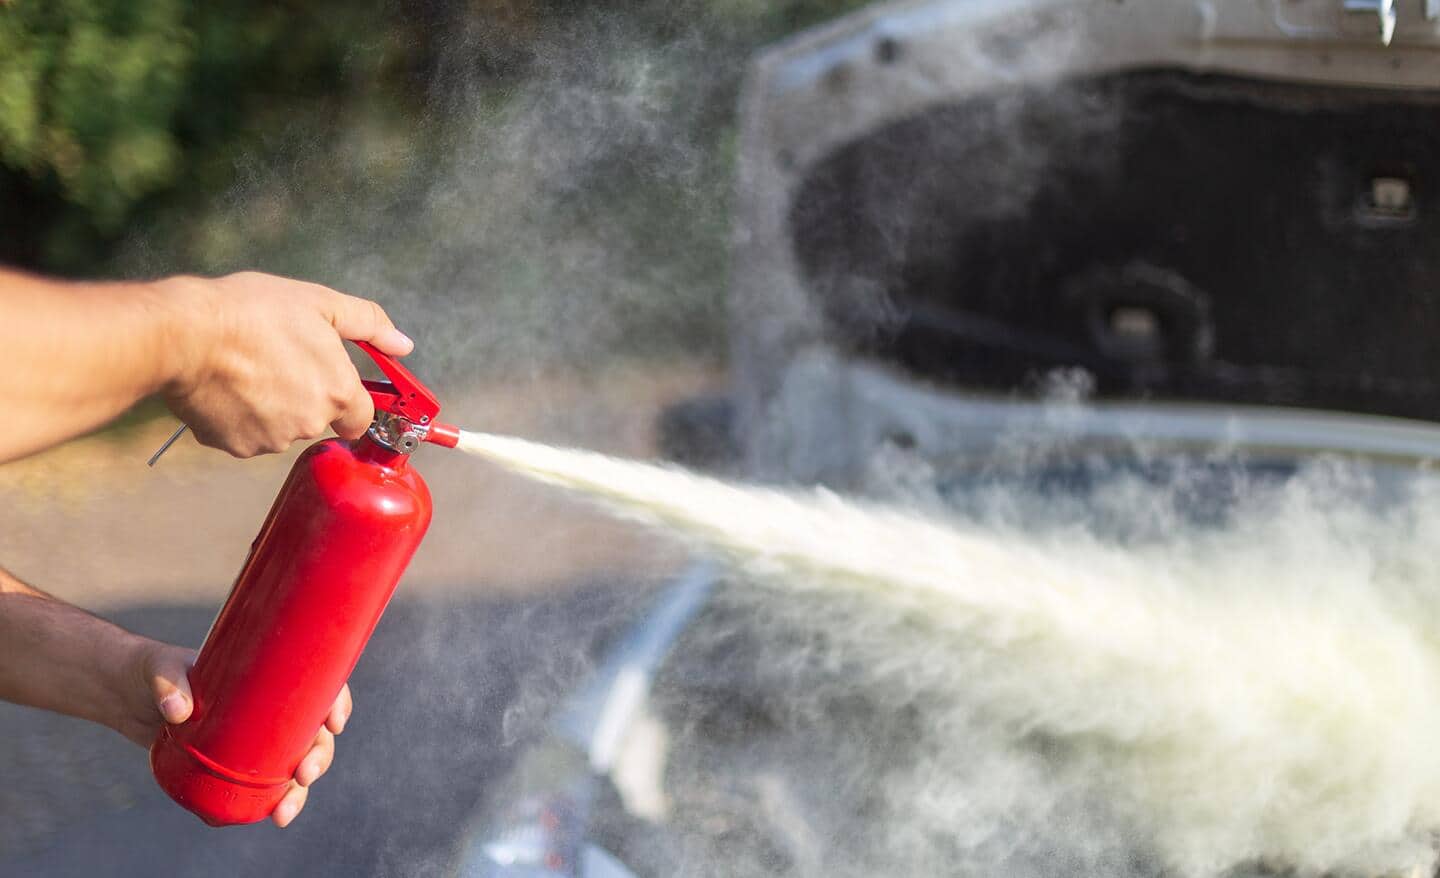 Someone using a fire extinguisher to put out an car engine fire.